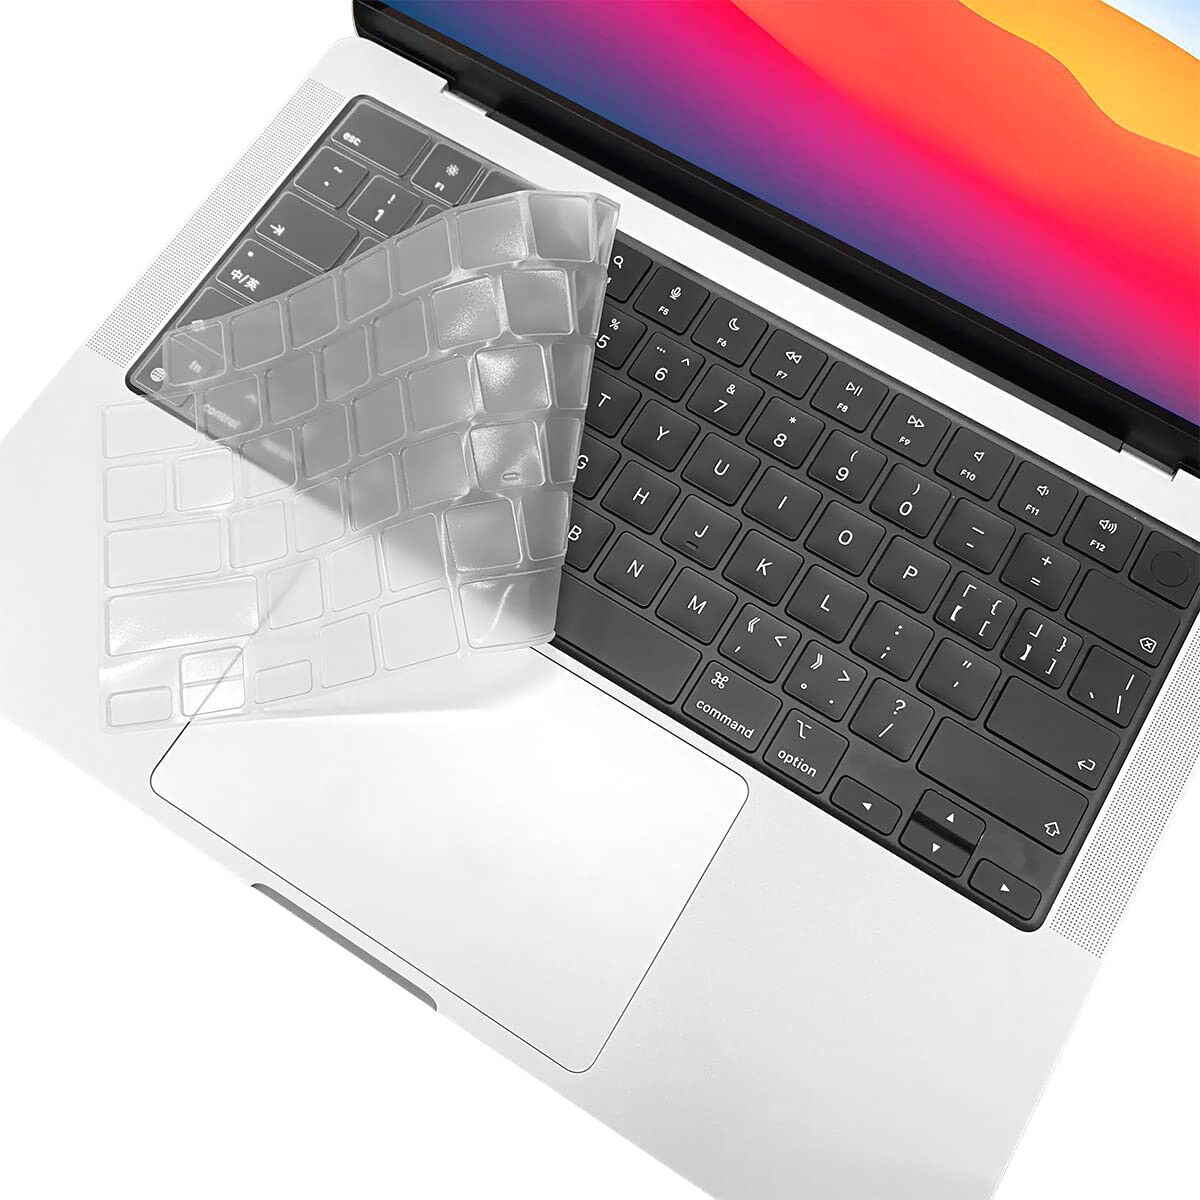 Keyboard Cover Thin Silicone Skin Protector For Macbook Air 13.3inch A1932 2018